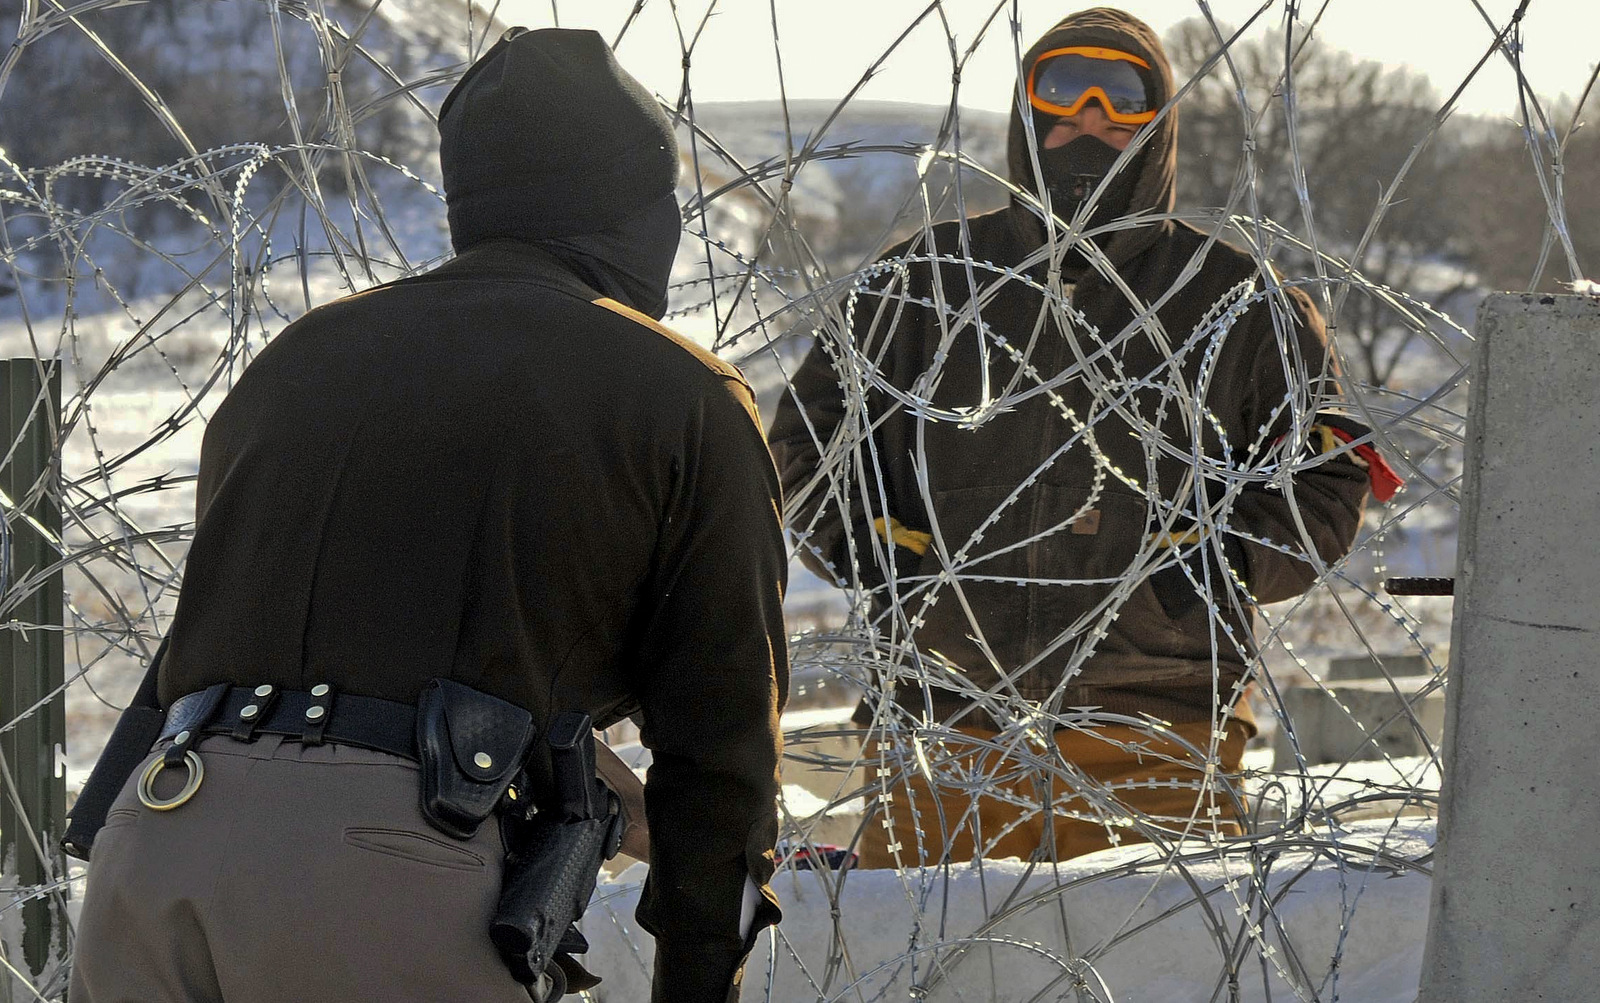 A law enforcement officer speaks to a protester against the Dakota Access Pipeline through a wall of razor wire on the Backwater Bridge over Cantapeta Creek on Thursday afternoon, Dec. 8, 2016. (Tom Stromme/The Bismarck Tribune via AP)